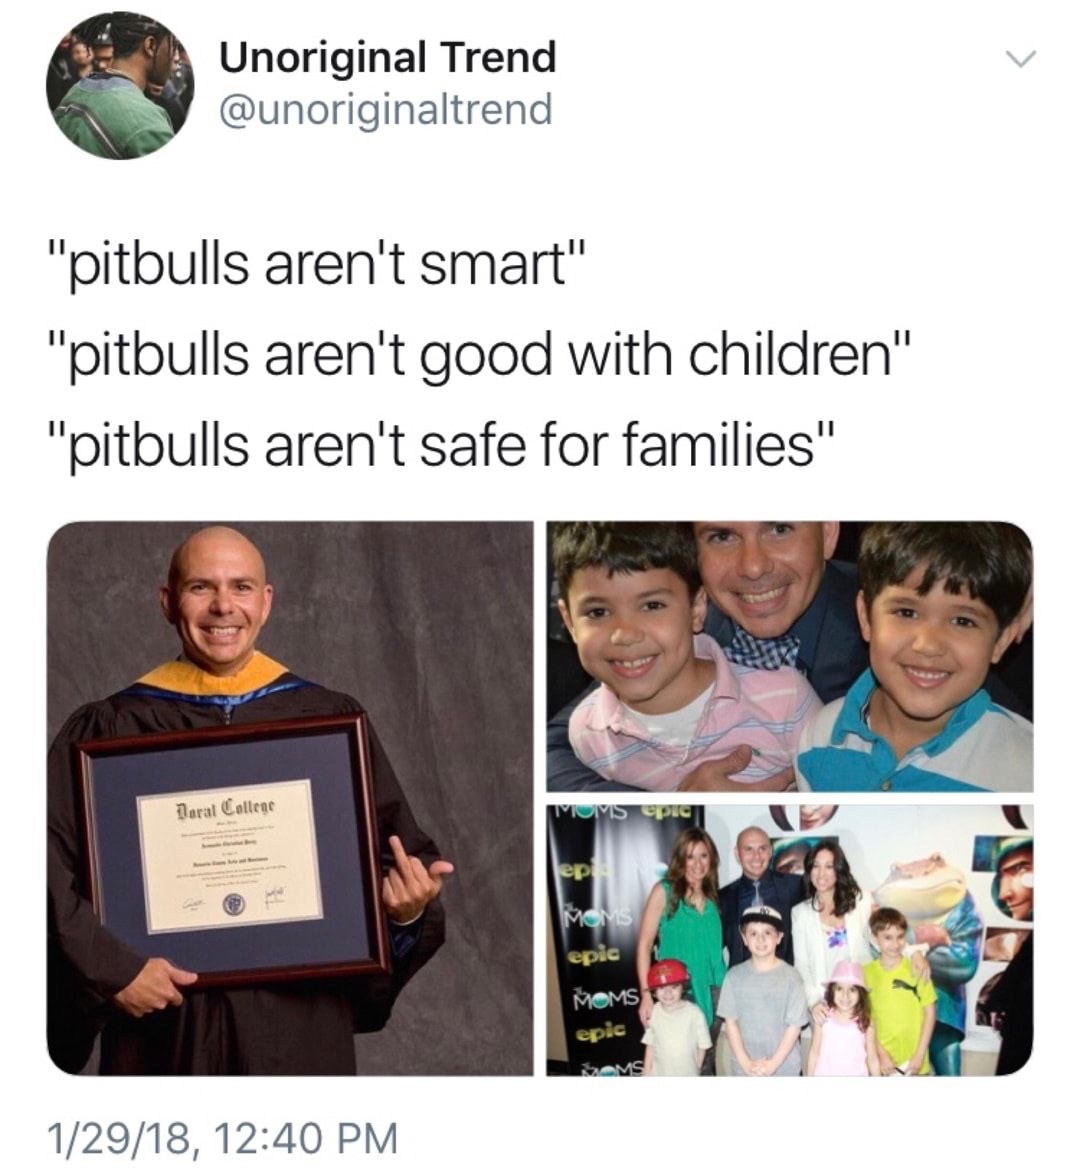 he's good with kids - Unoriginal Trend "pitbulls aren't smart" "pitbulls aren't good with children" "pitbulls aren't safe for families" Daral Collec Mums epic ep Moms epic Moms epic Sms 12918,